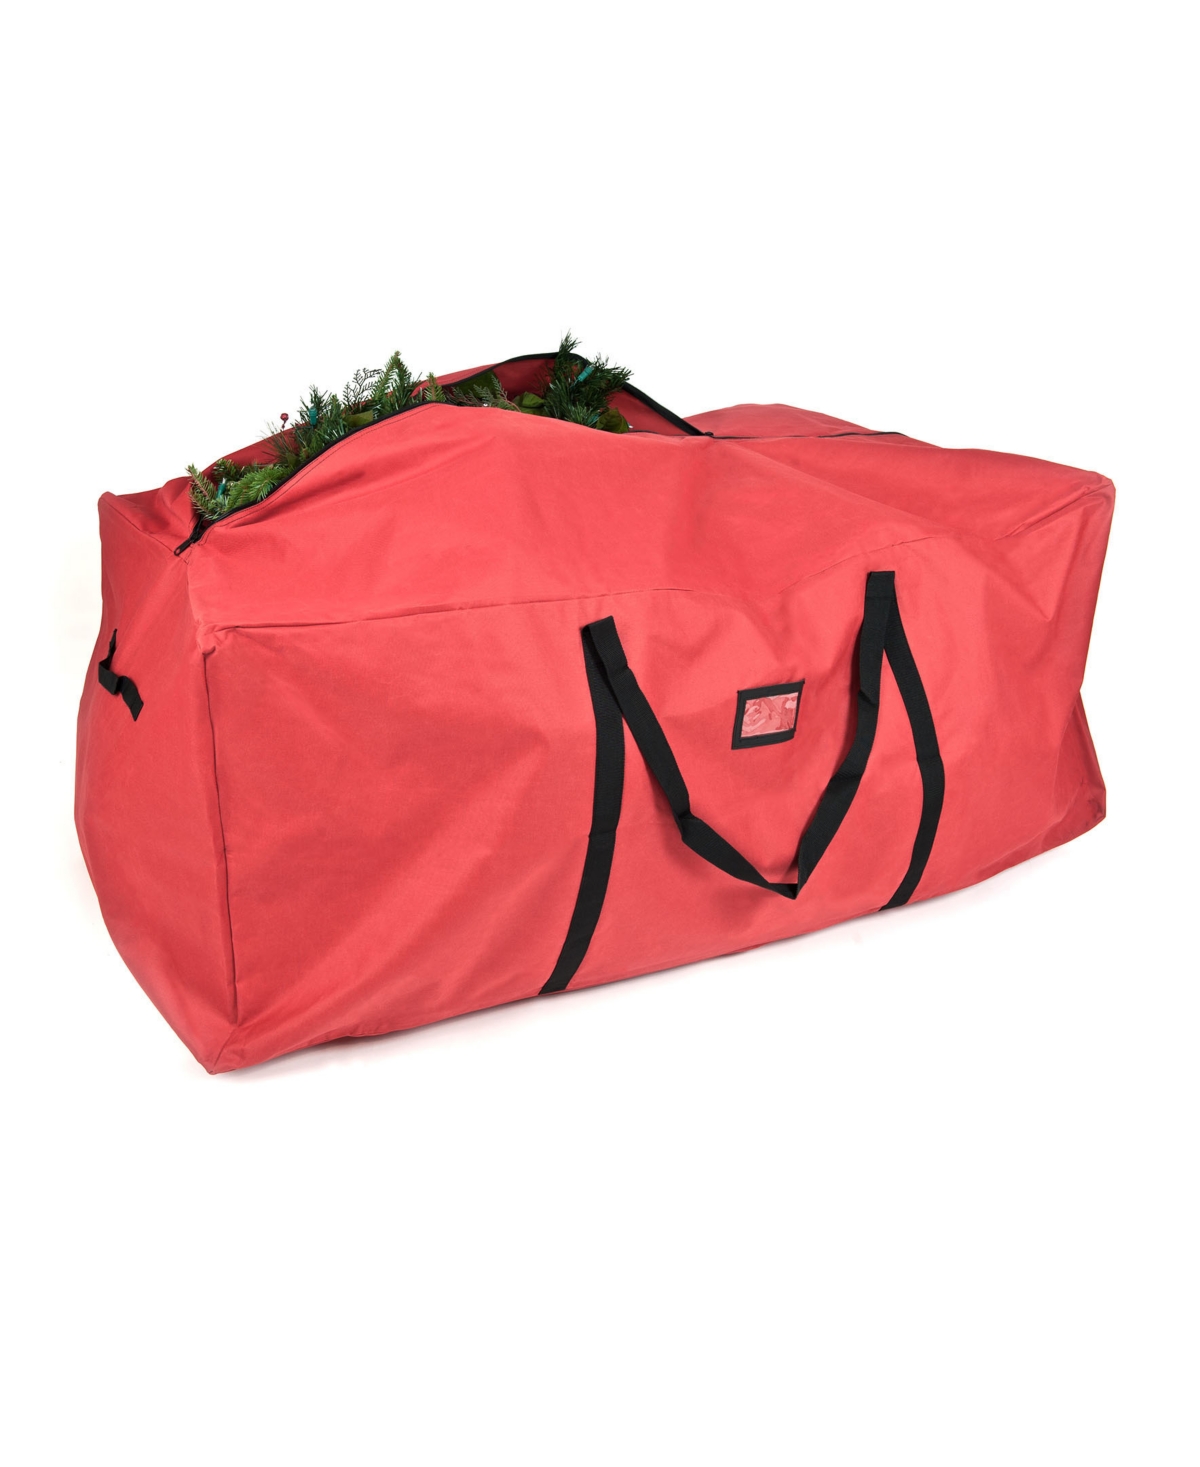 Extra Large Artificial Christmas Tree Storage Bag - Red